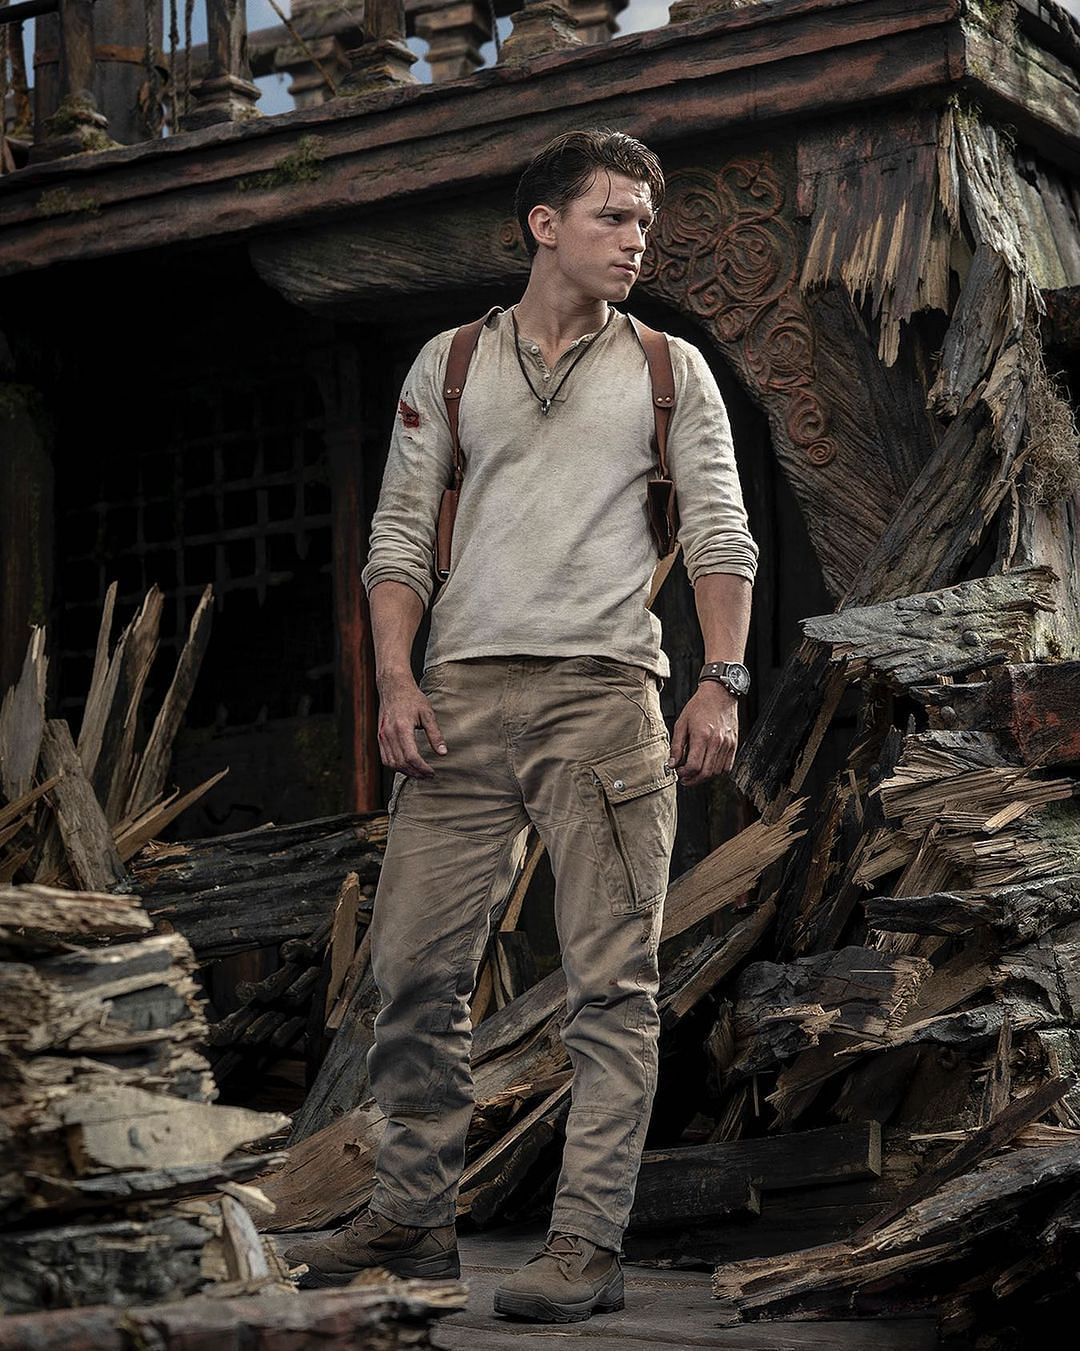 Who played Nathan Darke in Uncharted?